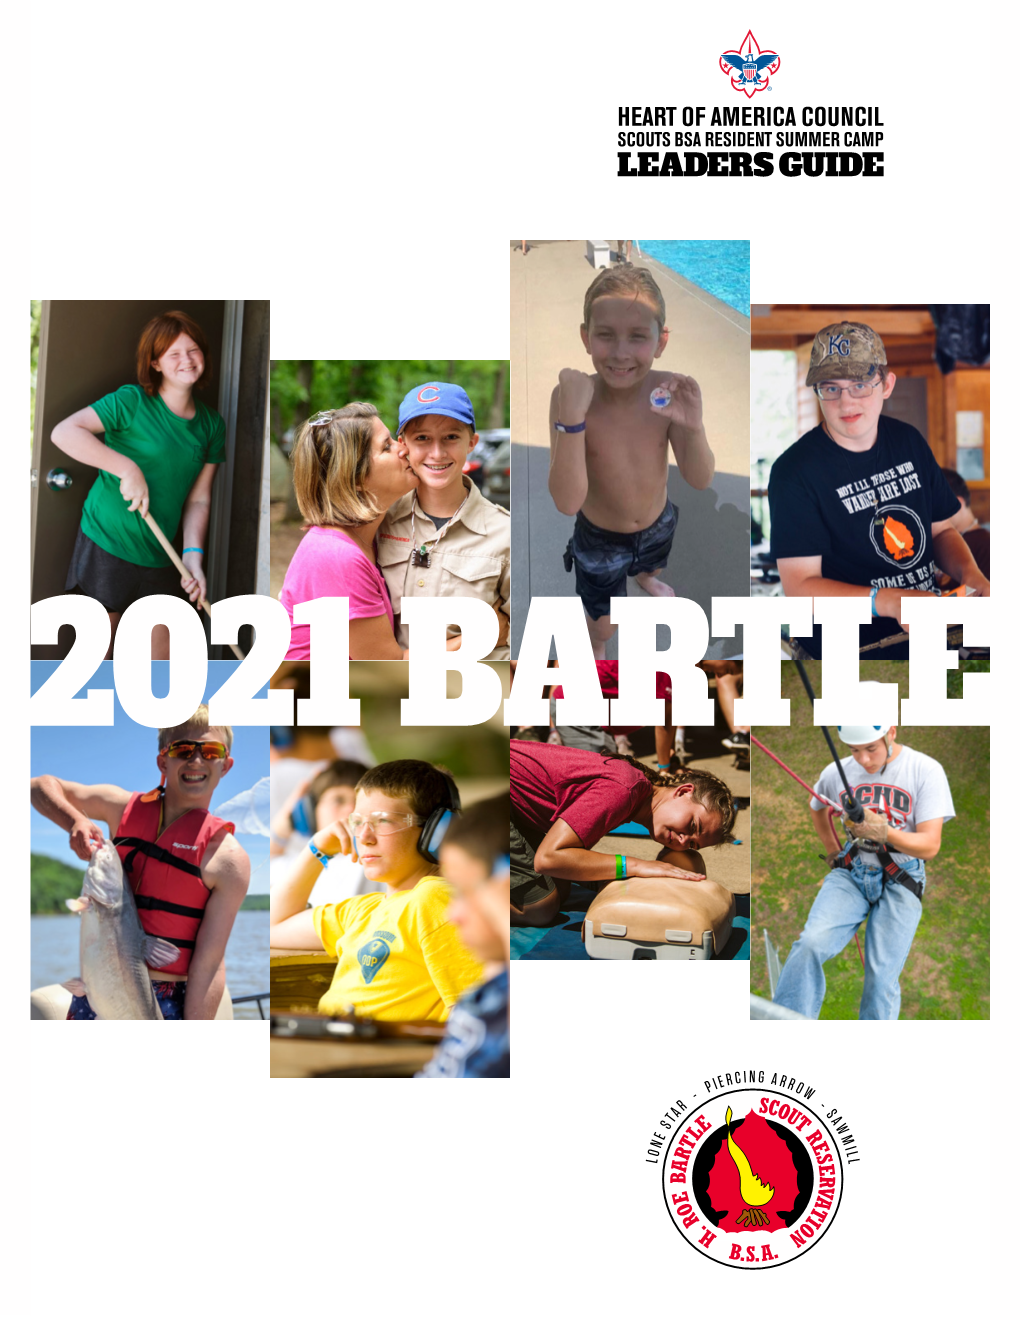 Bartle Leaders Guide 2021